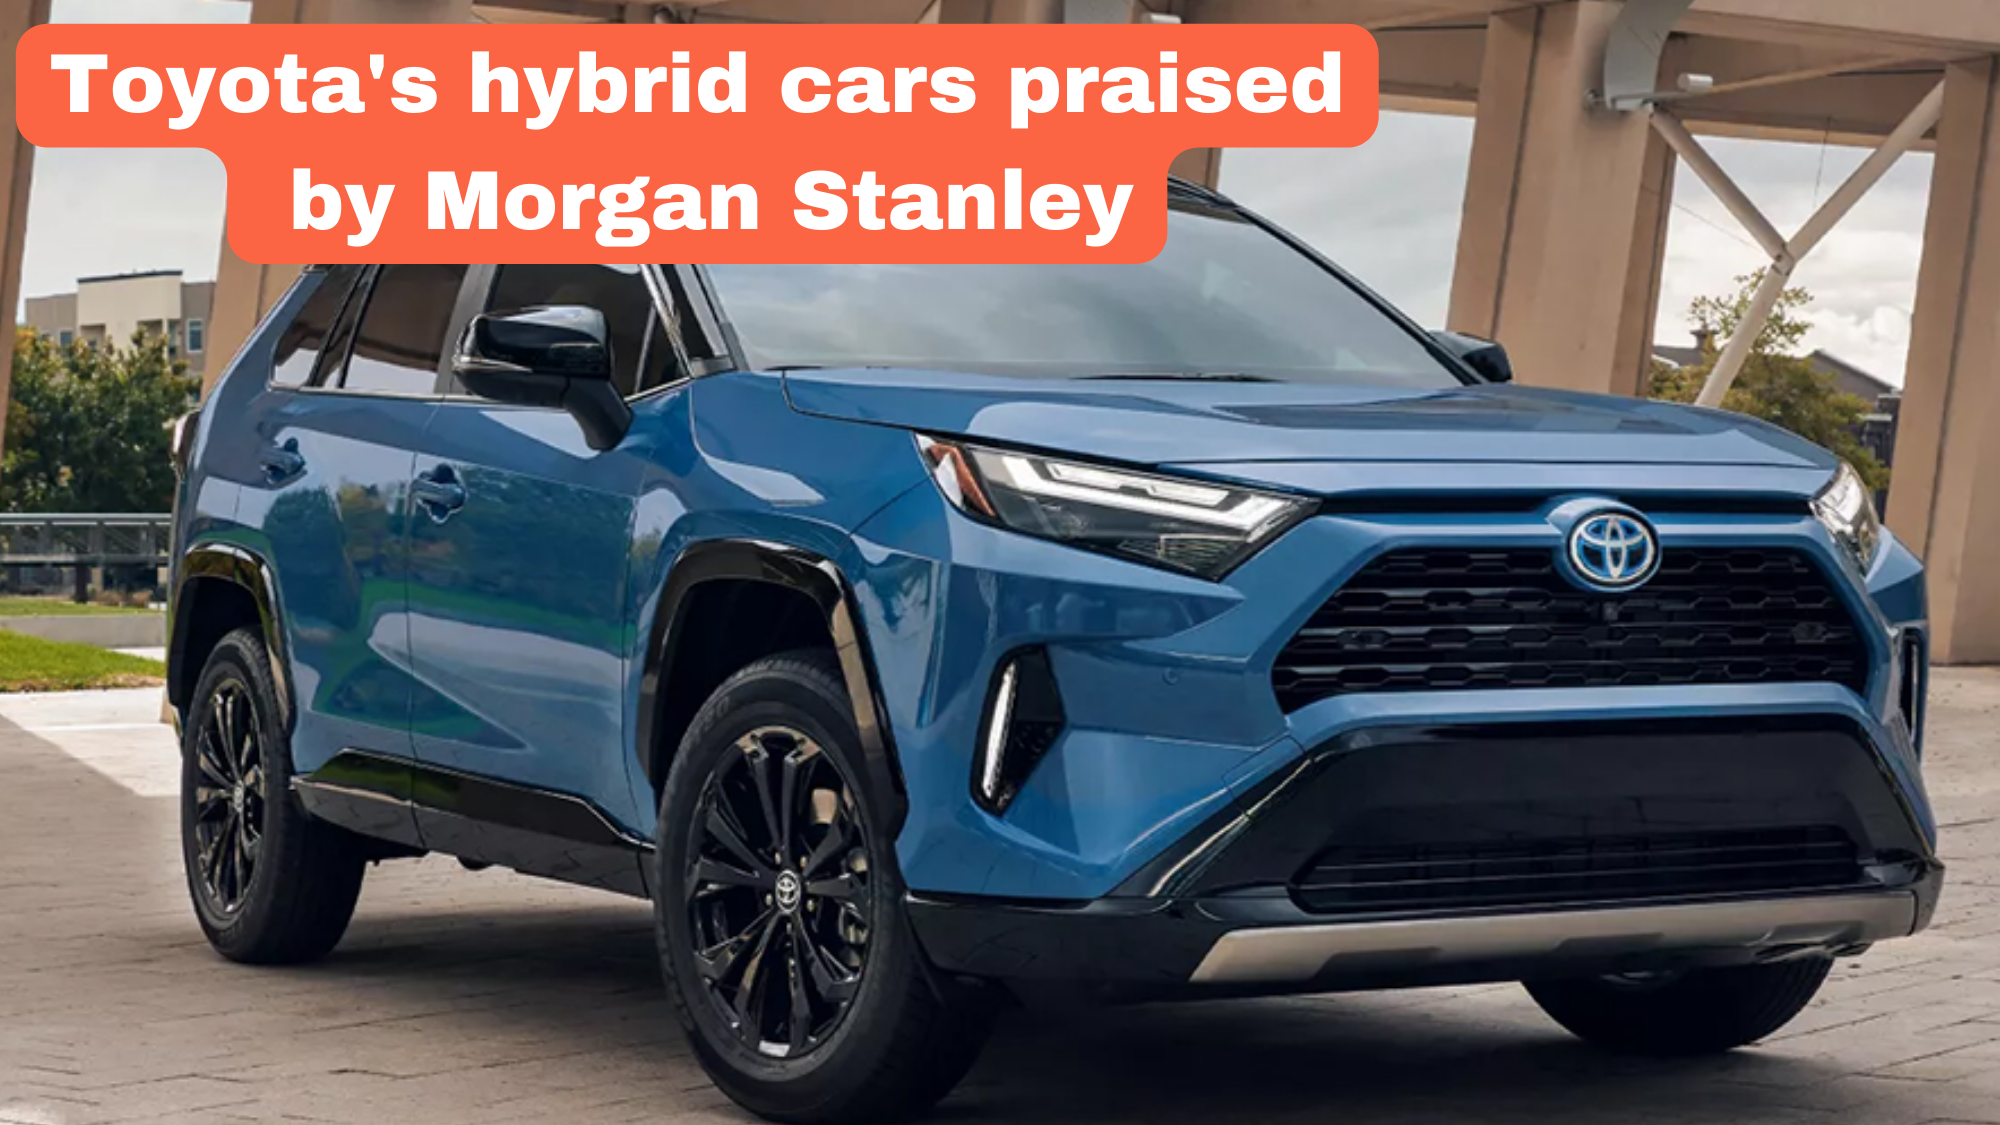 Toyota's hybrid cars praised by Morgan Stanley, Outlook upgraded.